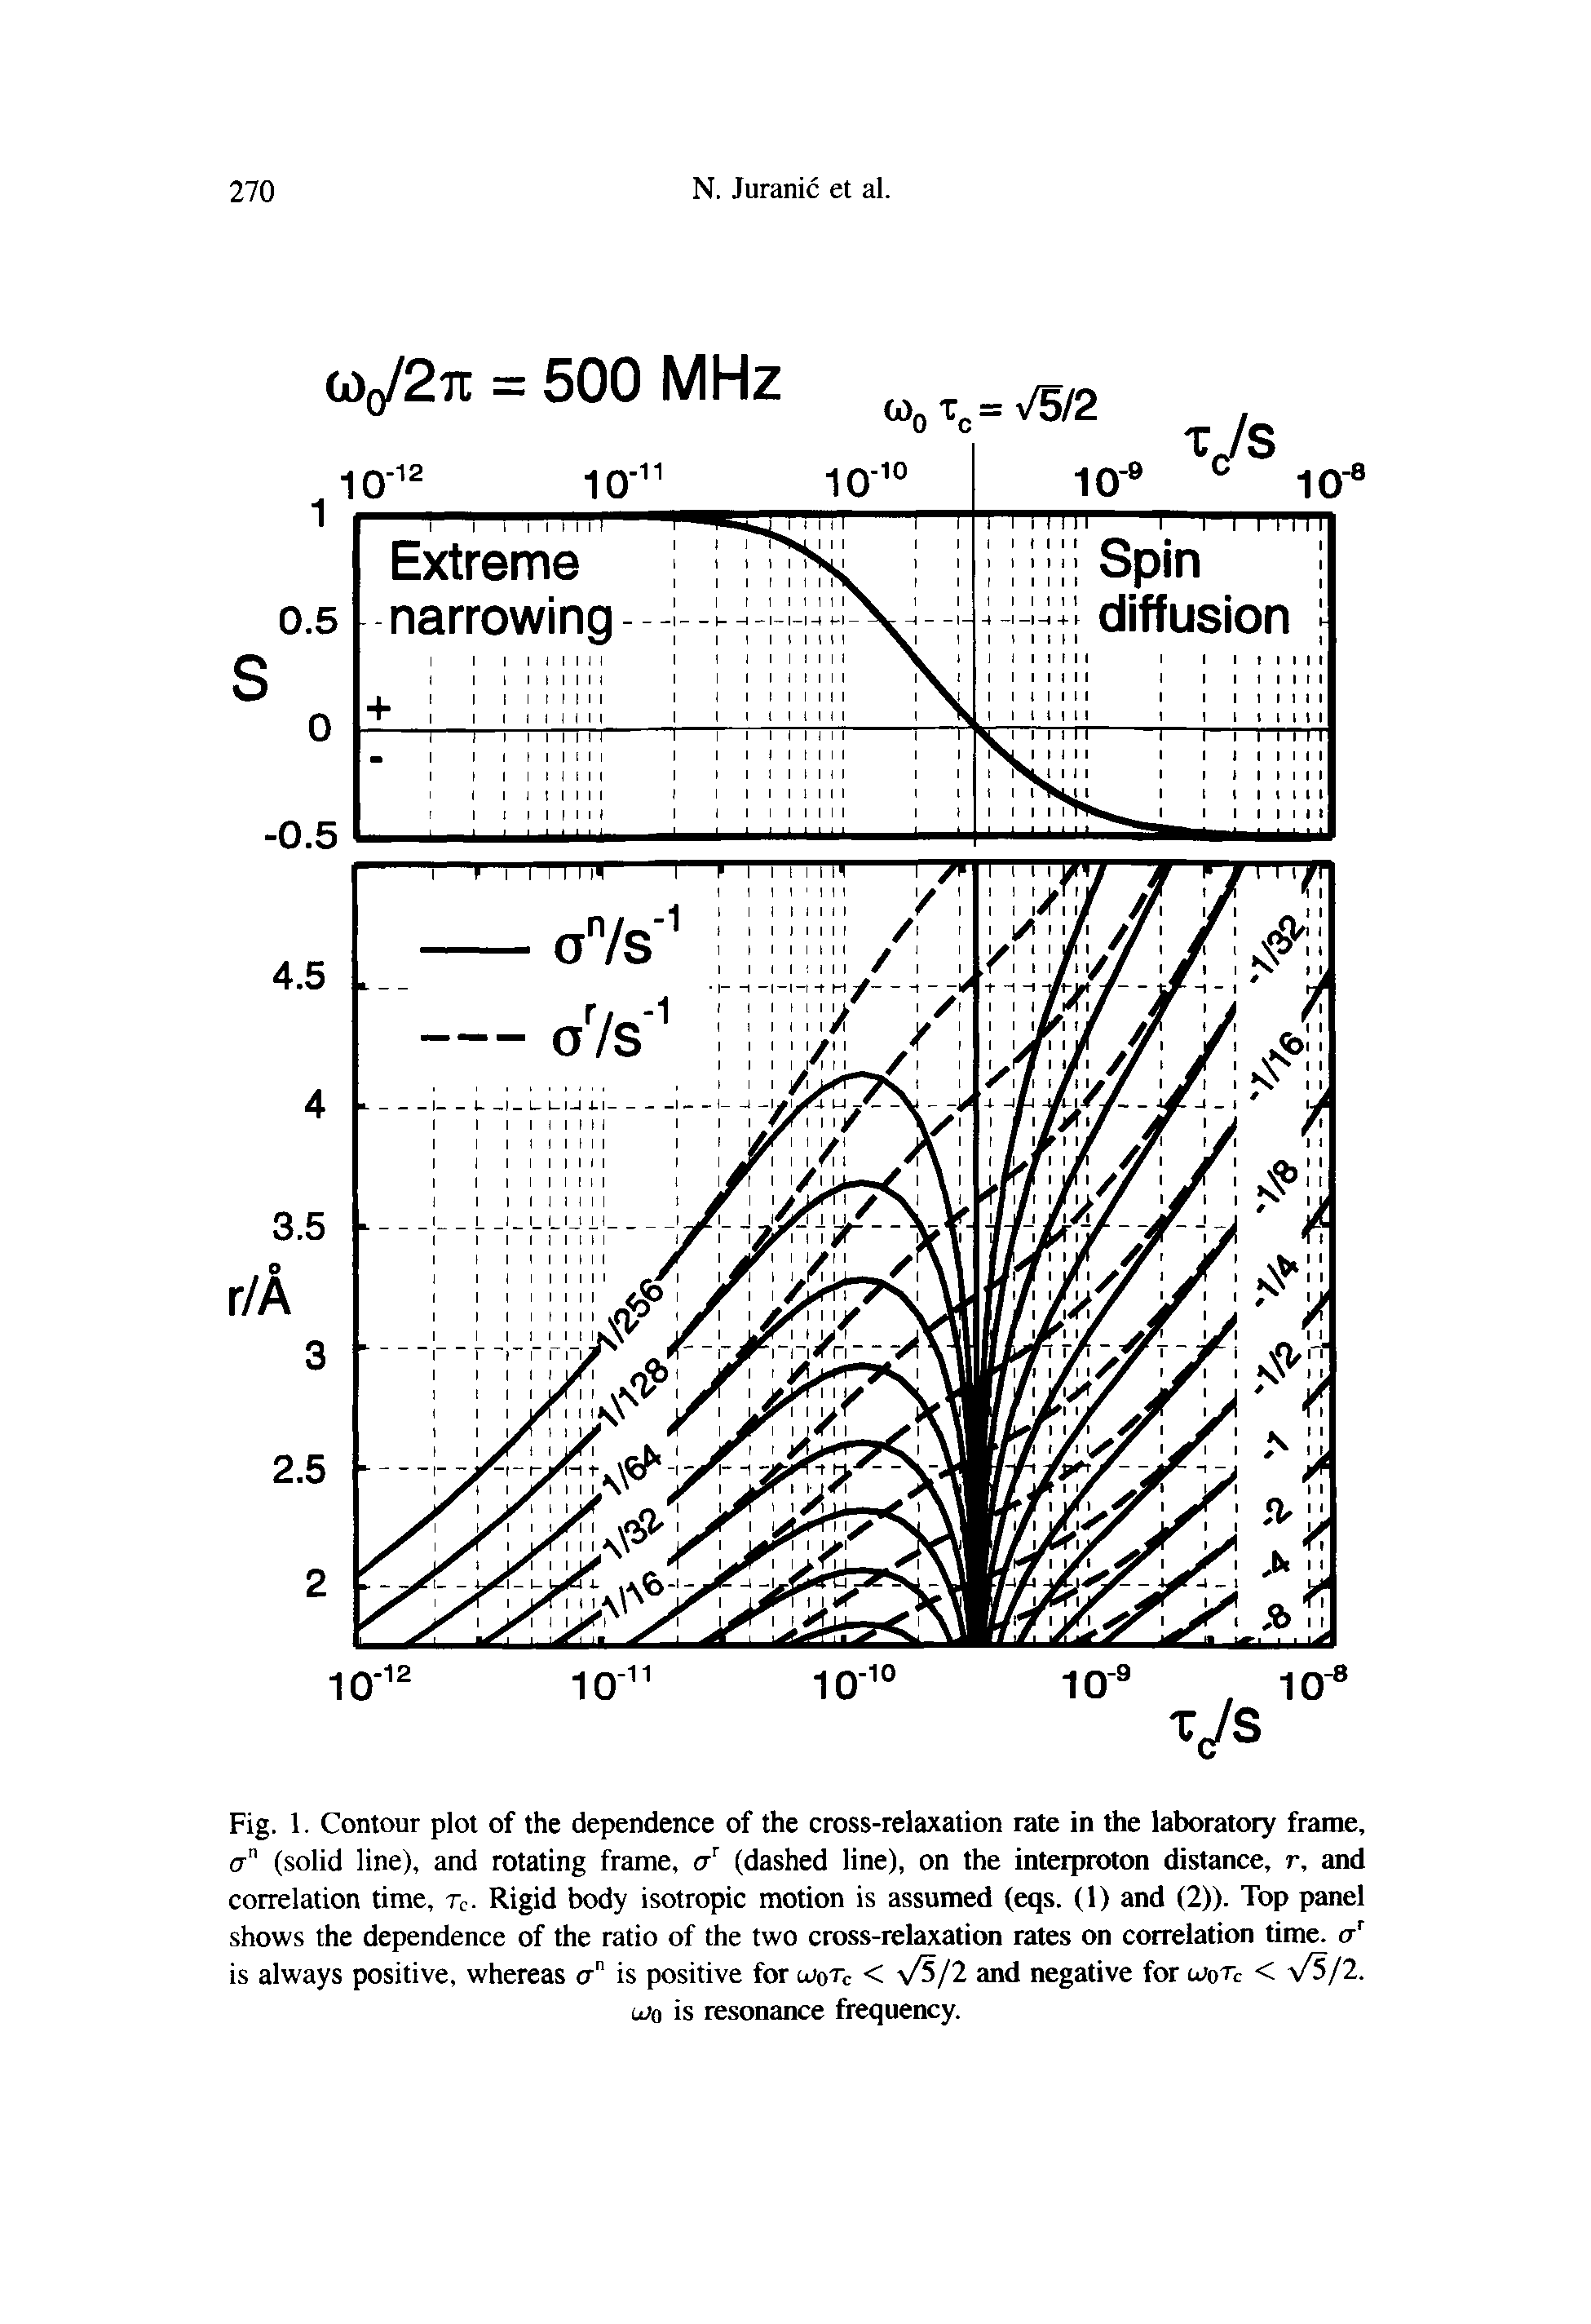 Fig. 1. Contour plot of the dependence of the cross-relaxation rate in the laboratory frame, a" (solid line), and rotating frame, cr (dashed line), on the interproton distance, r, and correlation time, Tc. Rigid body isotropic motion is assumed (eqs. (1) and (2)). Top panel shows the dependence of the ratio of the two cross-relaxation rates on correlation time, a is always positive, whereas cr" is positive for tuoTc < v/5/2 and negative for woTi < /5/2.